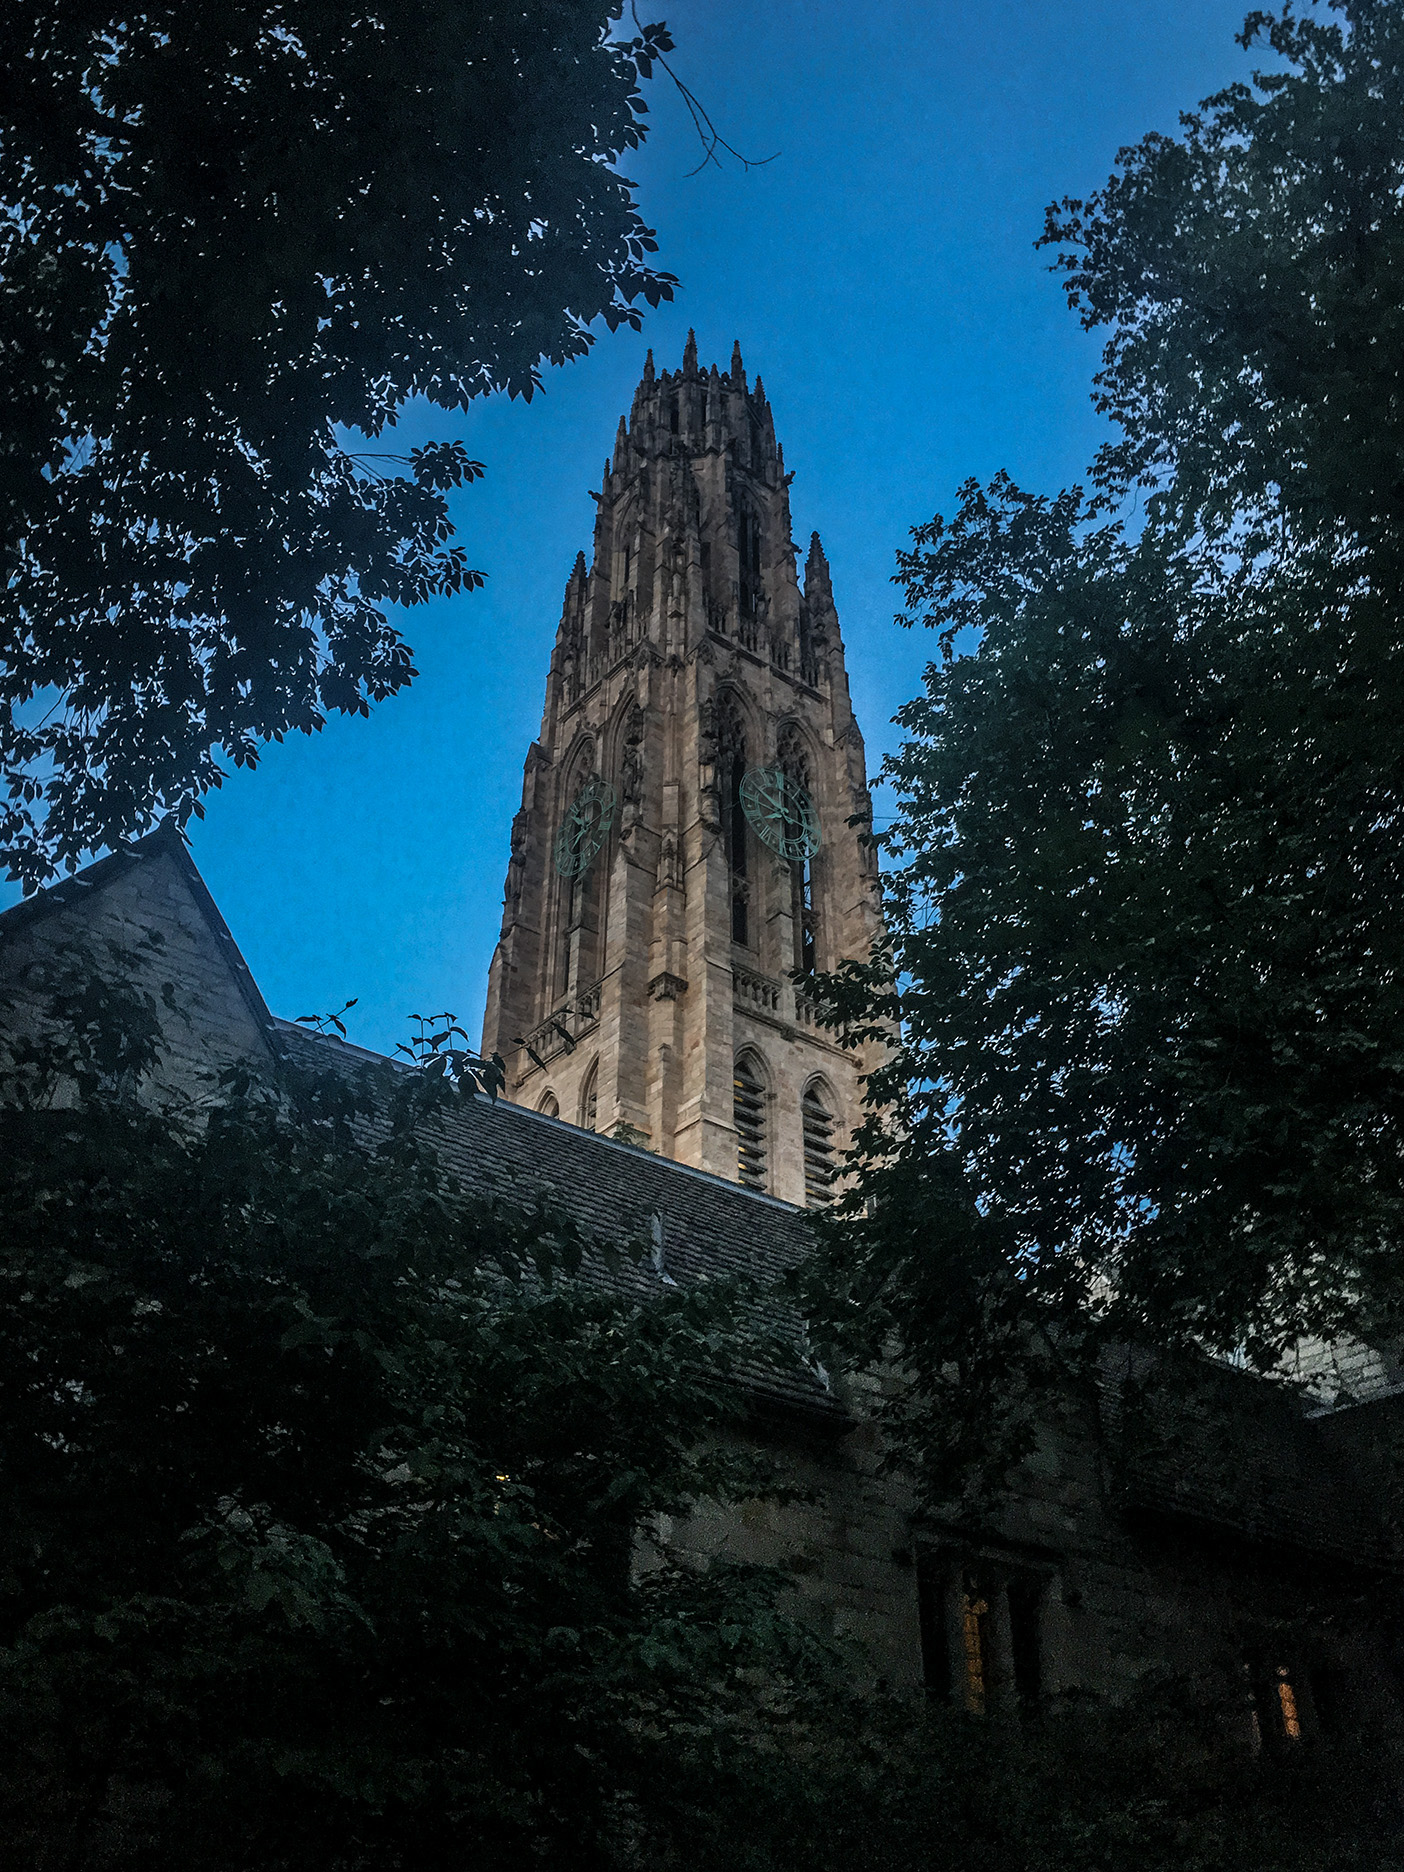 Harkness Tower on the campus of Yale University.